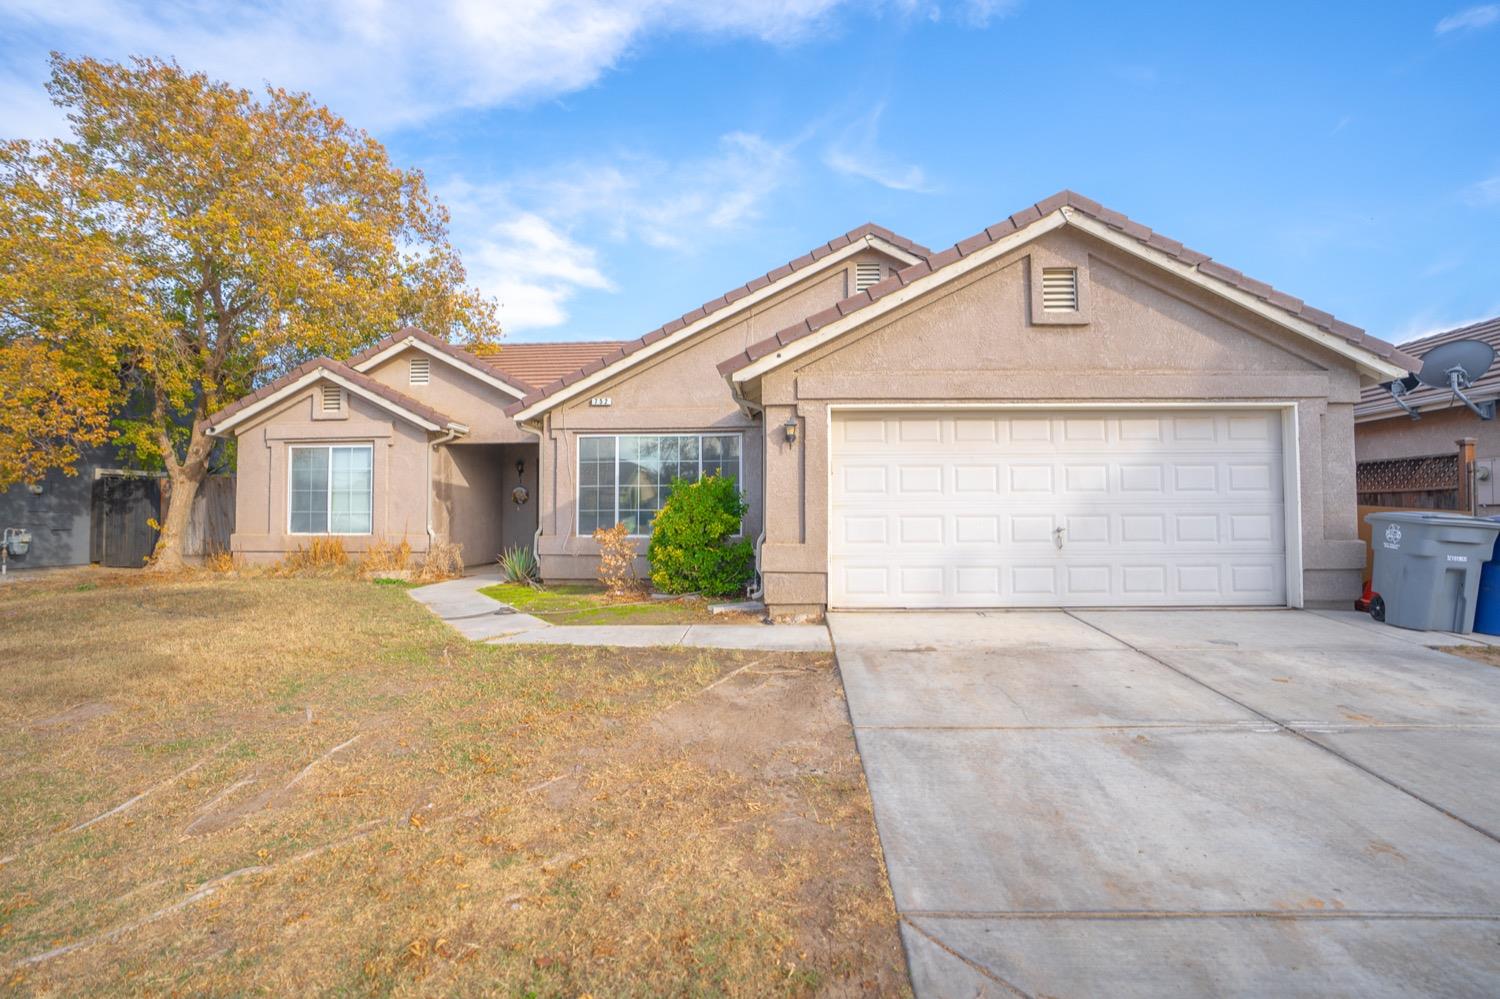 Welcome to 752 Windsor Ct, your cozy but spacious  home with 3 bedrooms and 2 baths at the end of a 